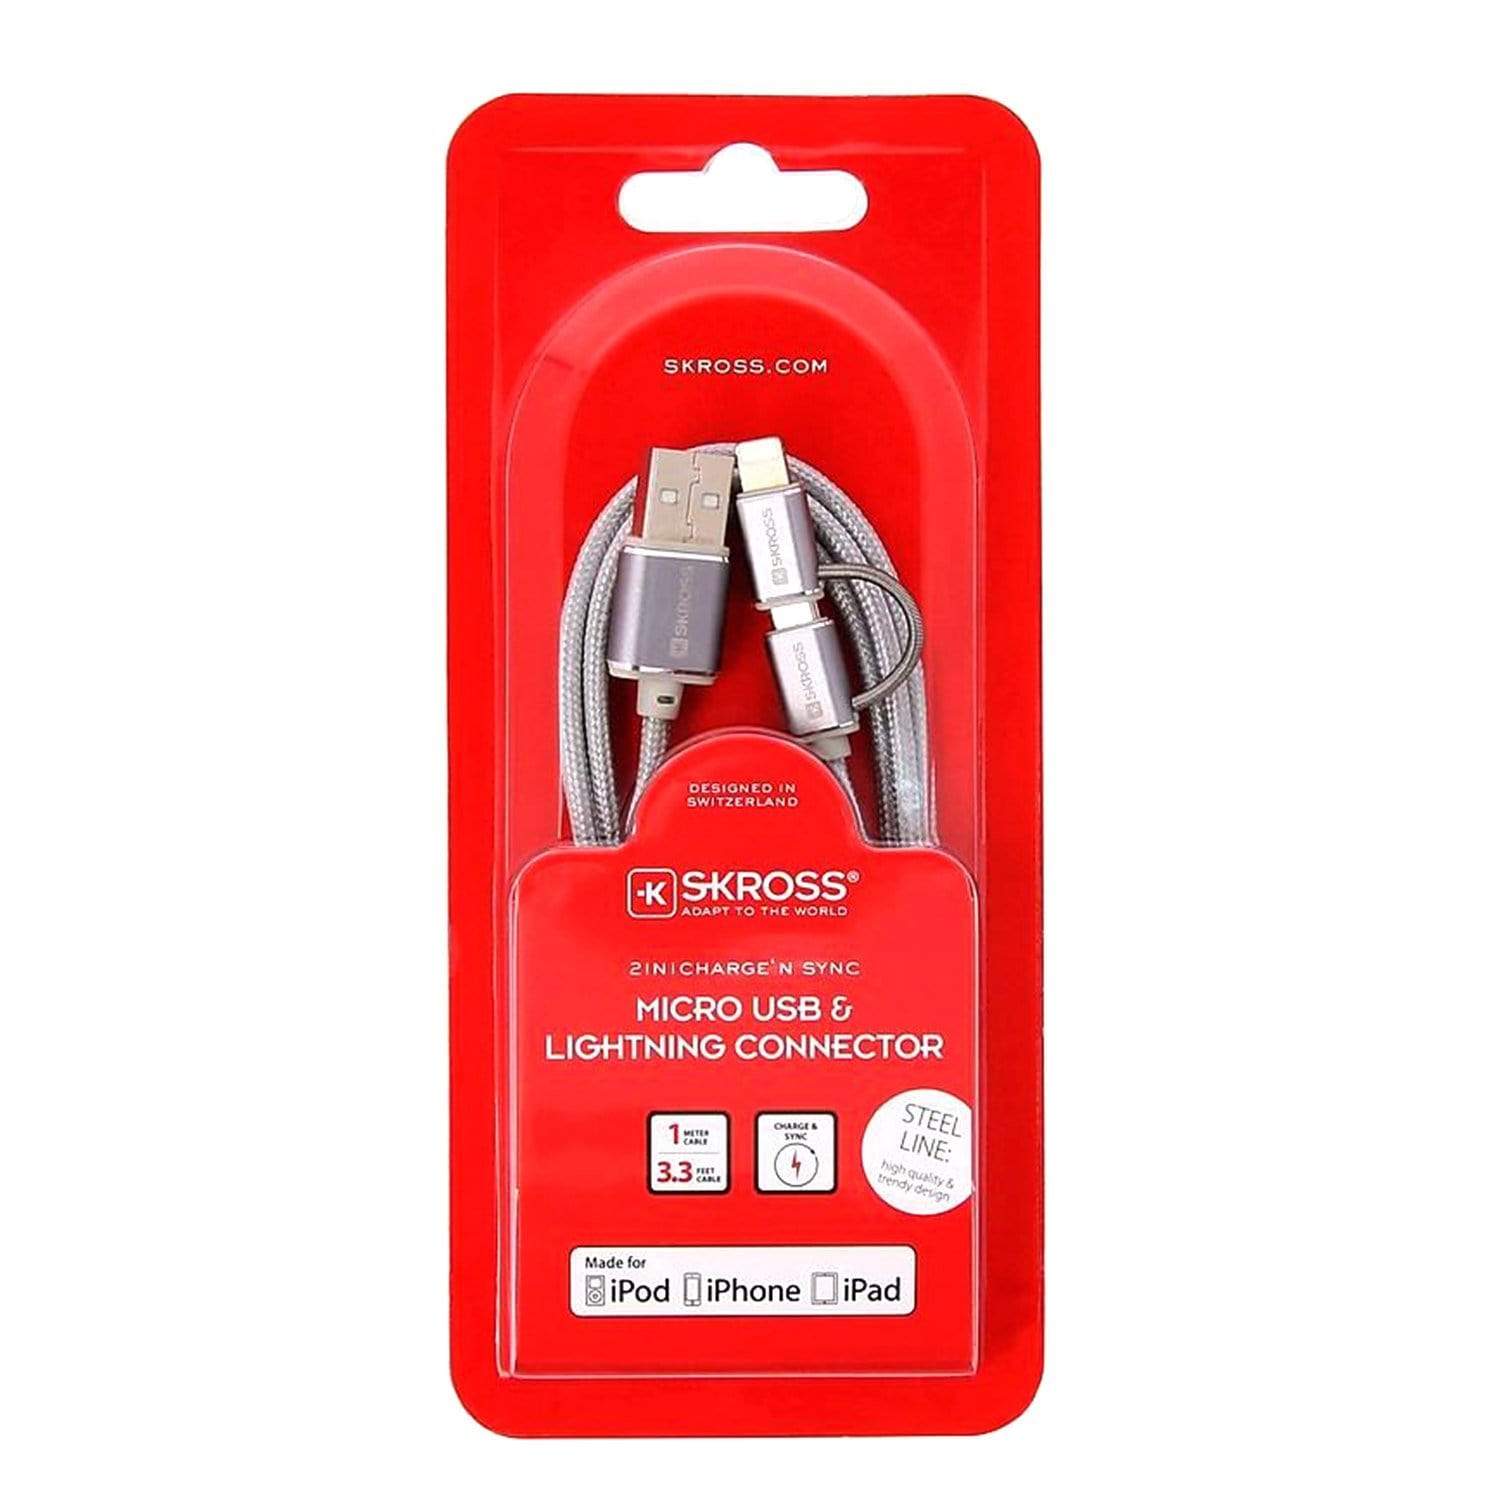 Skross Steel Line 2 in 1 Charge N Sync Micro USB Cable with Lightning Connector - Silver - 2700241 - Jashanmal Home